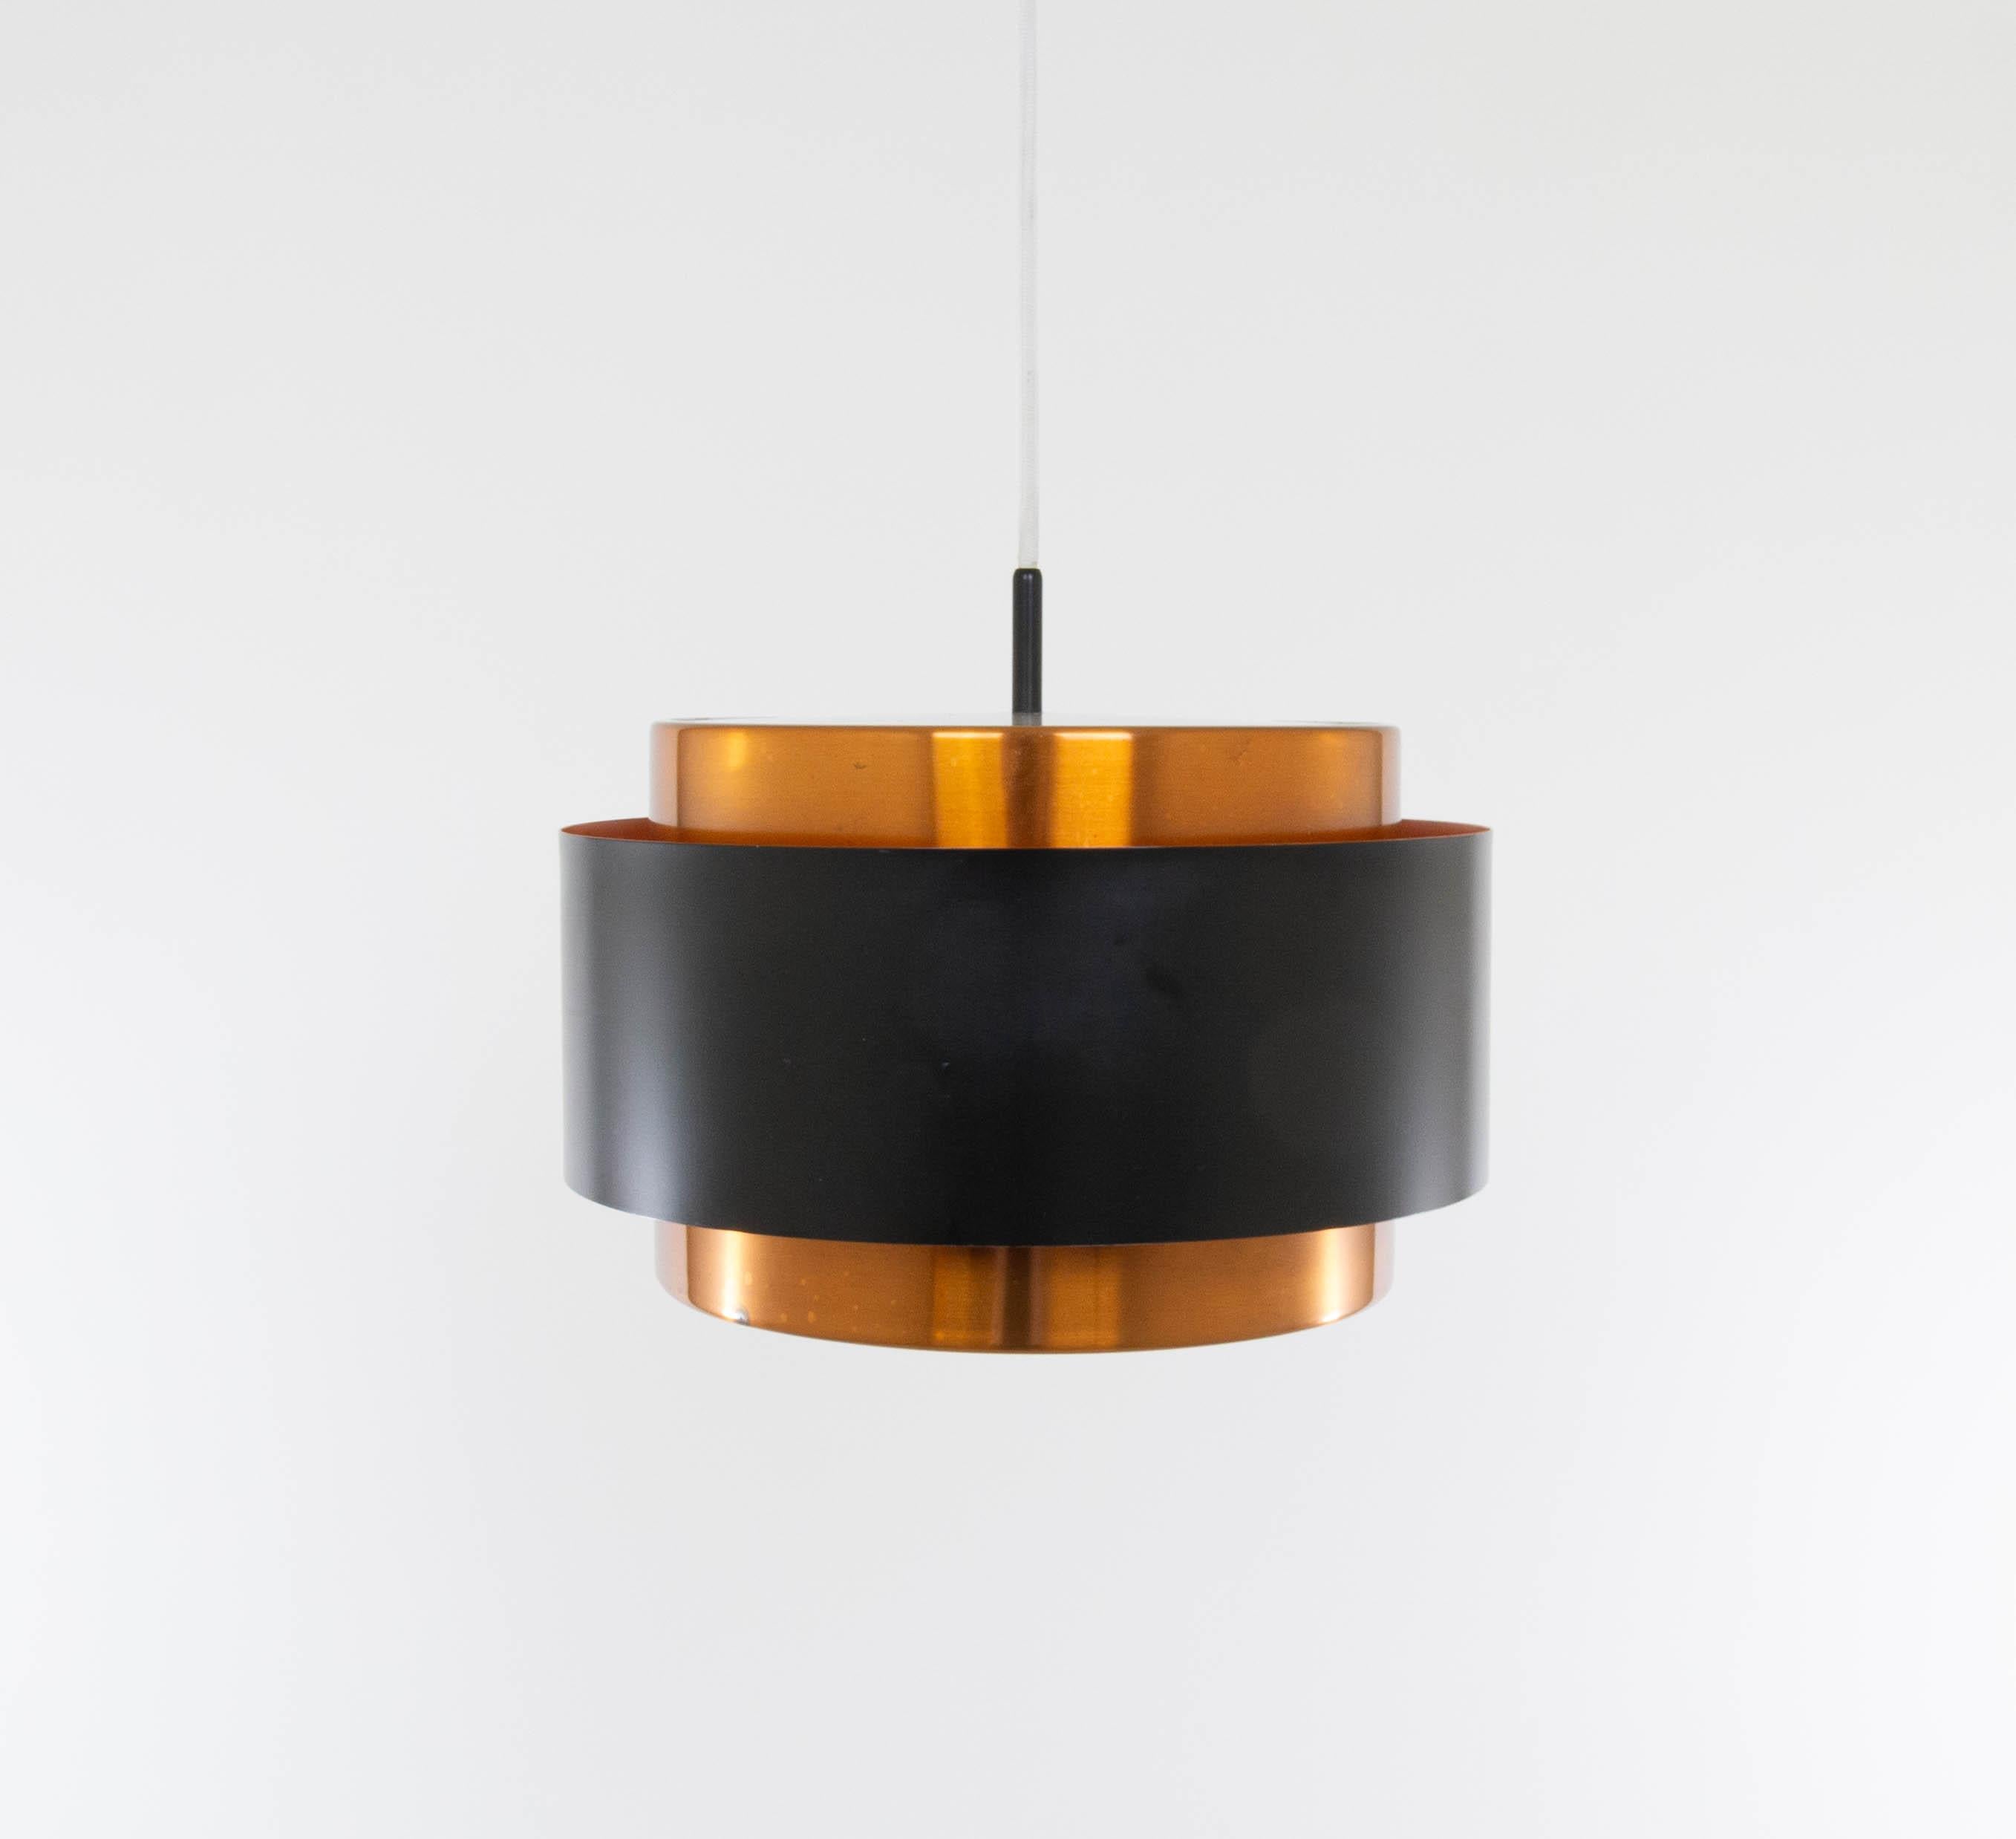 Saturn pendant, designed by Danish designer Jo Hammerborg and manufactured by Fog & Mørup.

The model is a structure of two concentric cylindrical copper bands that are held together by a black lacquered band. At the top and the bottom, the